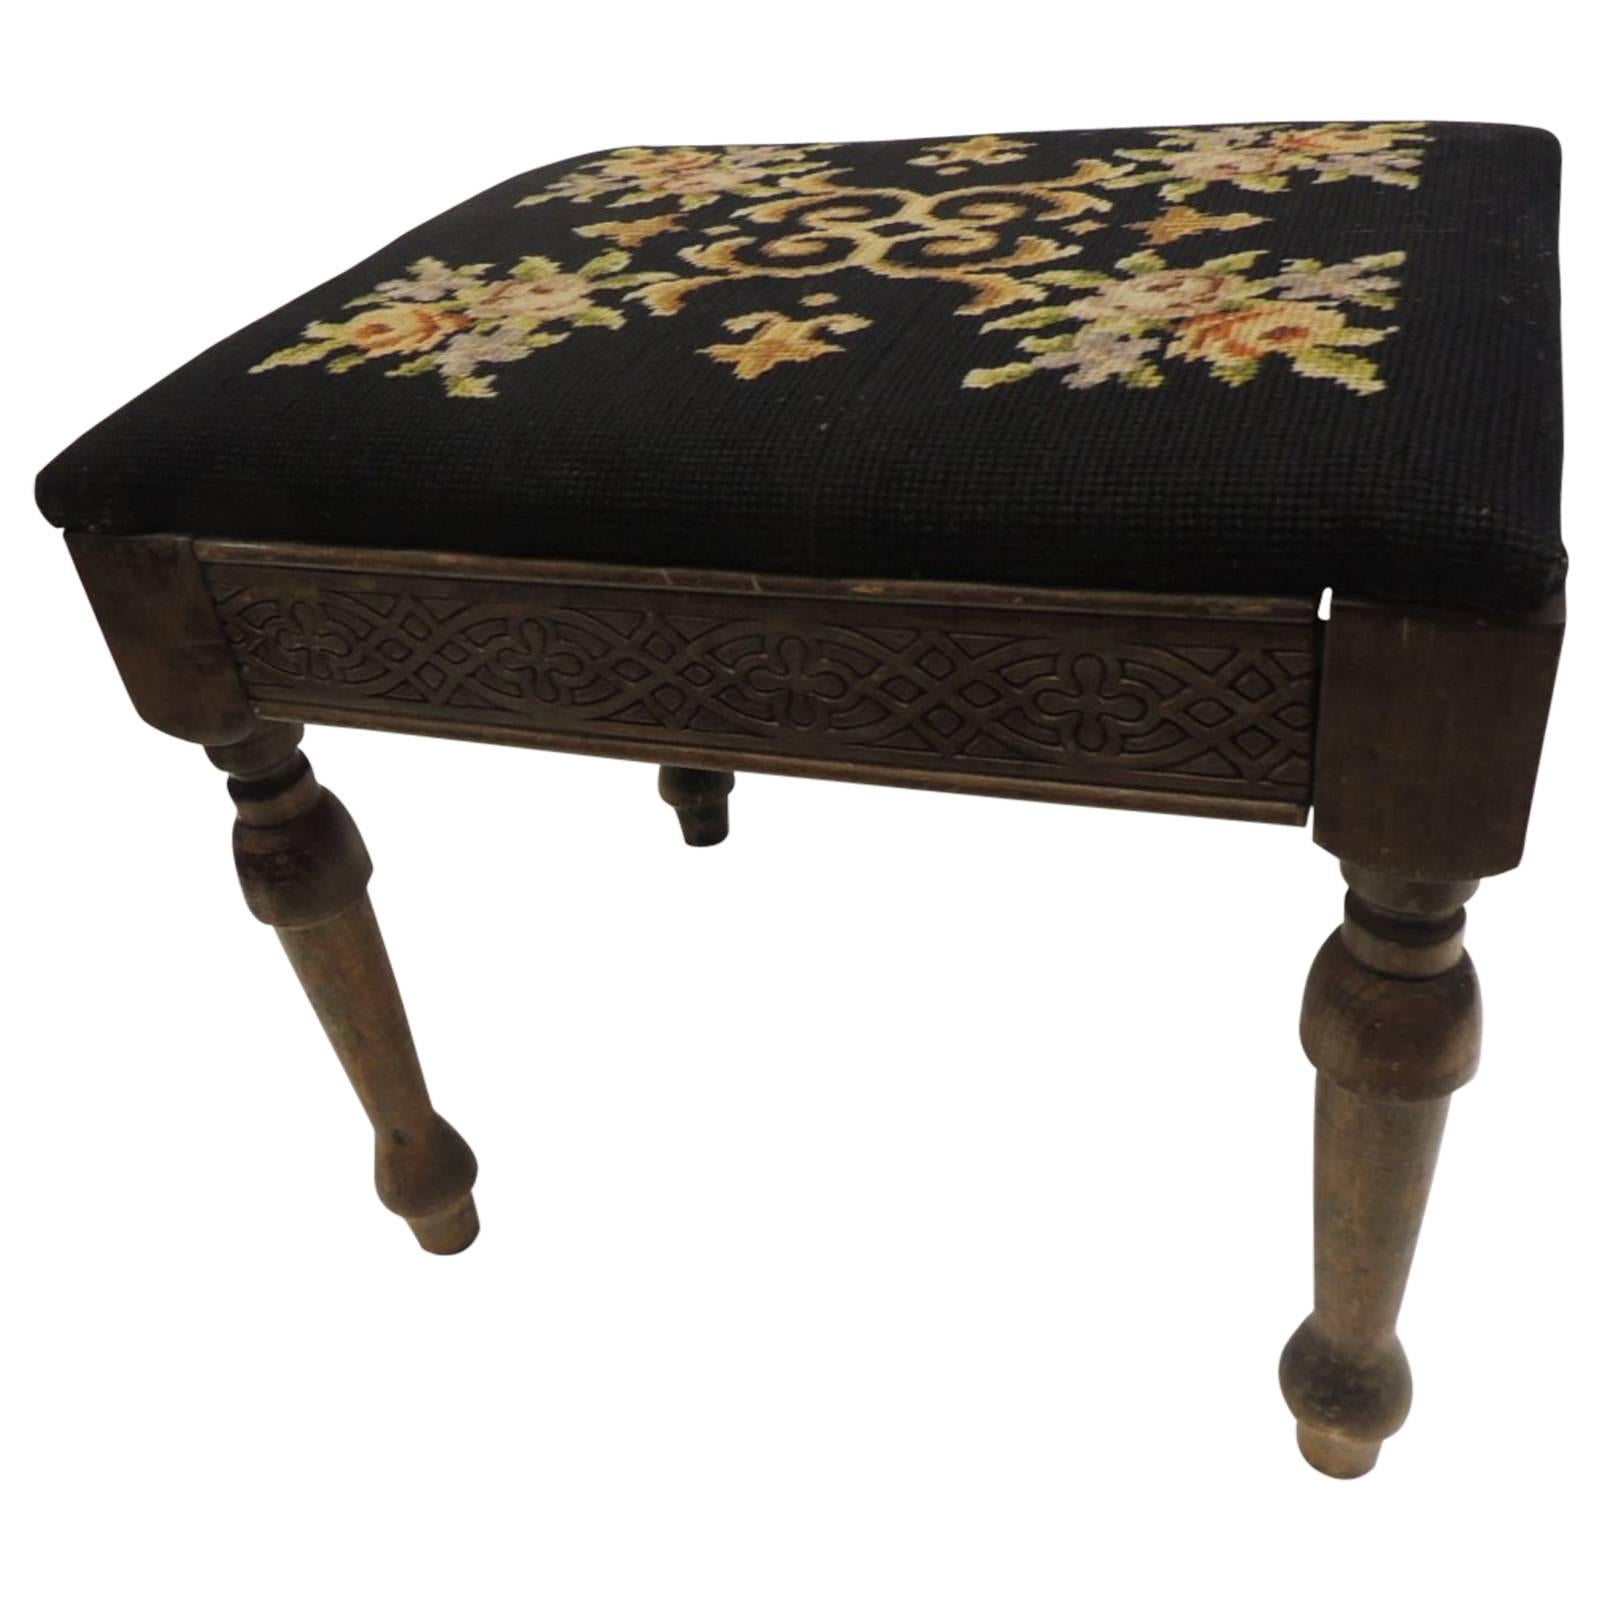 Vintage Gothic Style Footstool Reupholstered with Floral Tapestry Louis XVI Styl